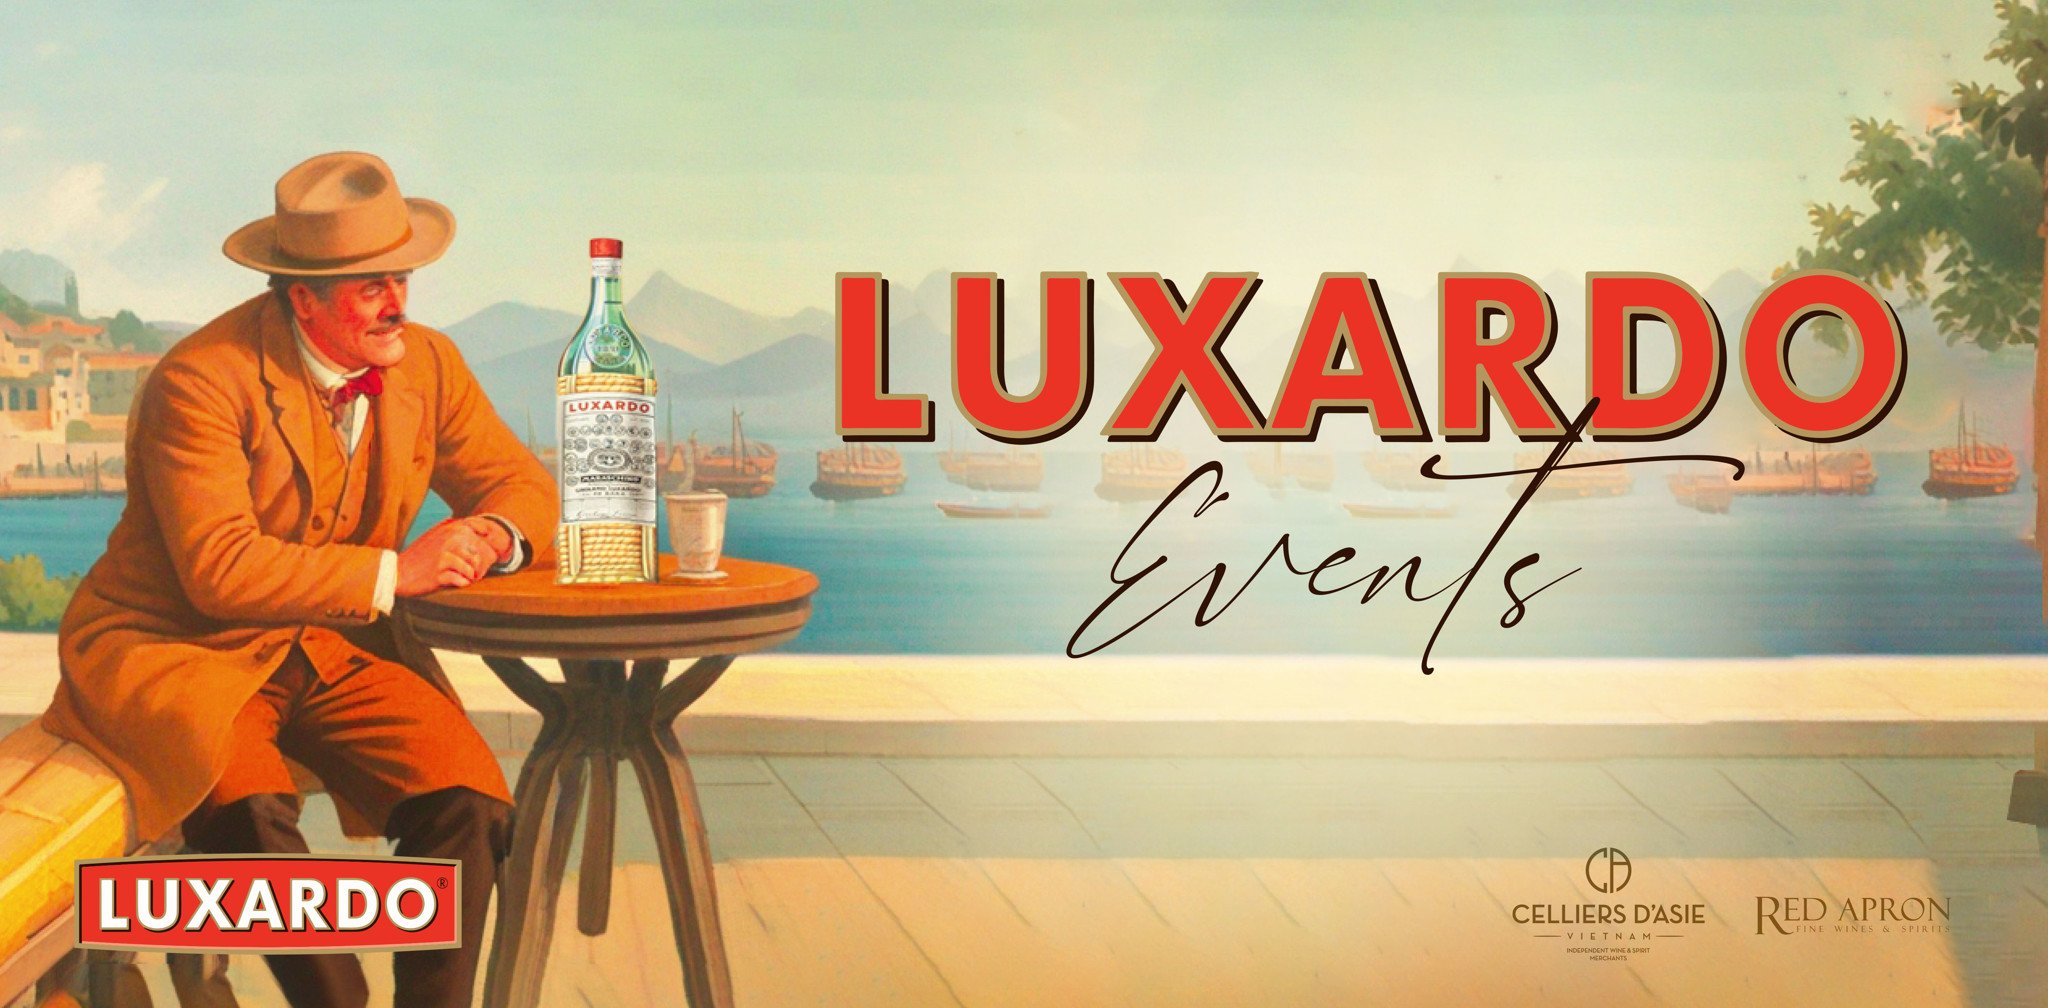 TP.HCM - LUXARDO COMPETITION: SEMI-FINAL & FINAL | DRINKING & HEALING